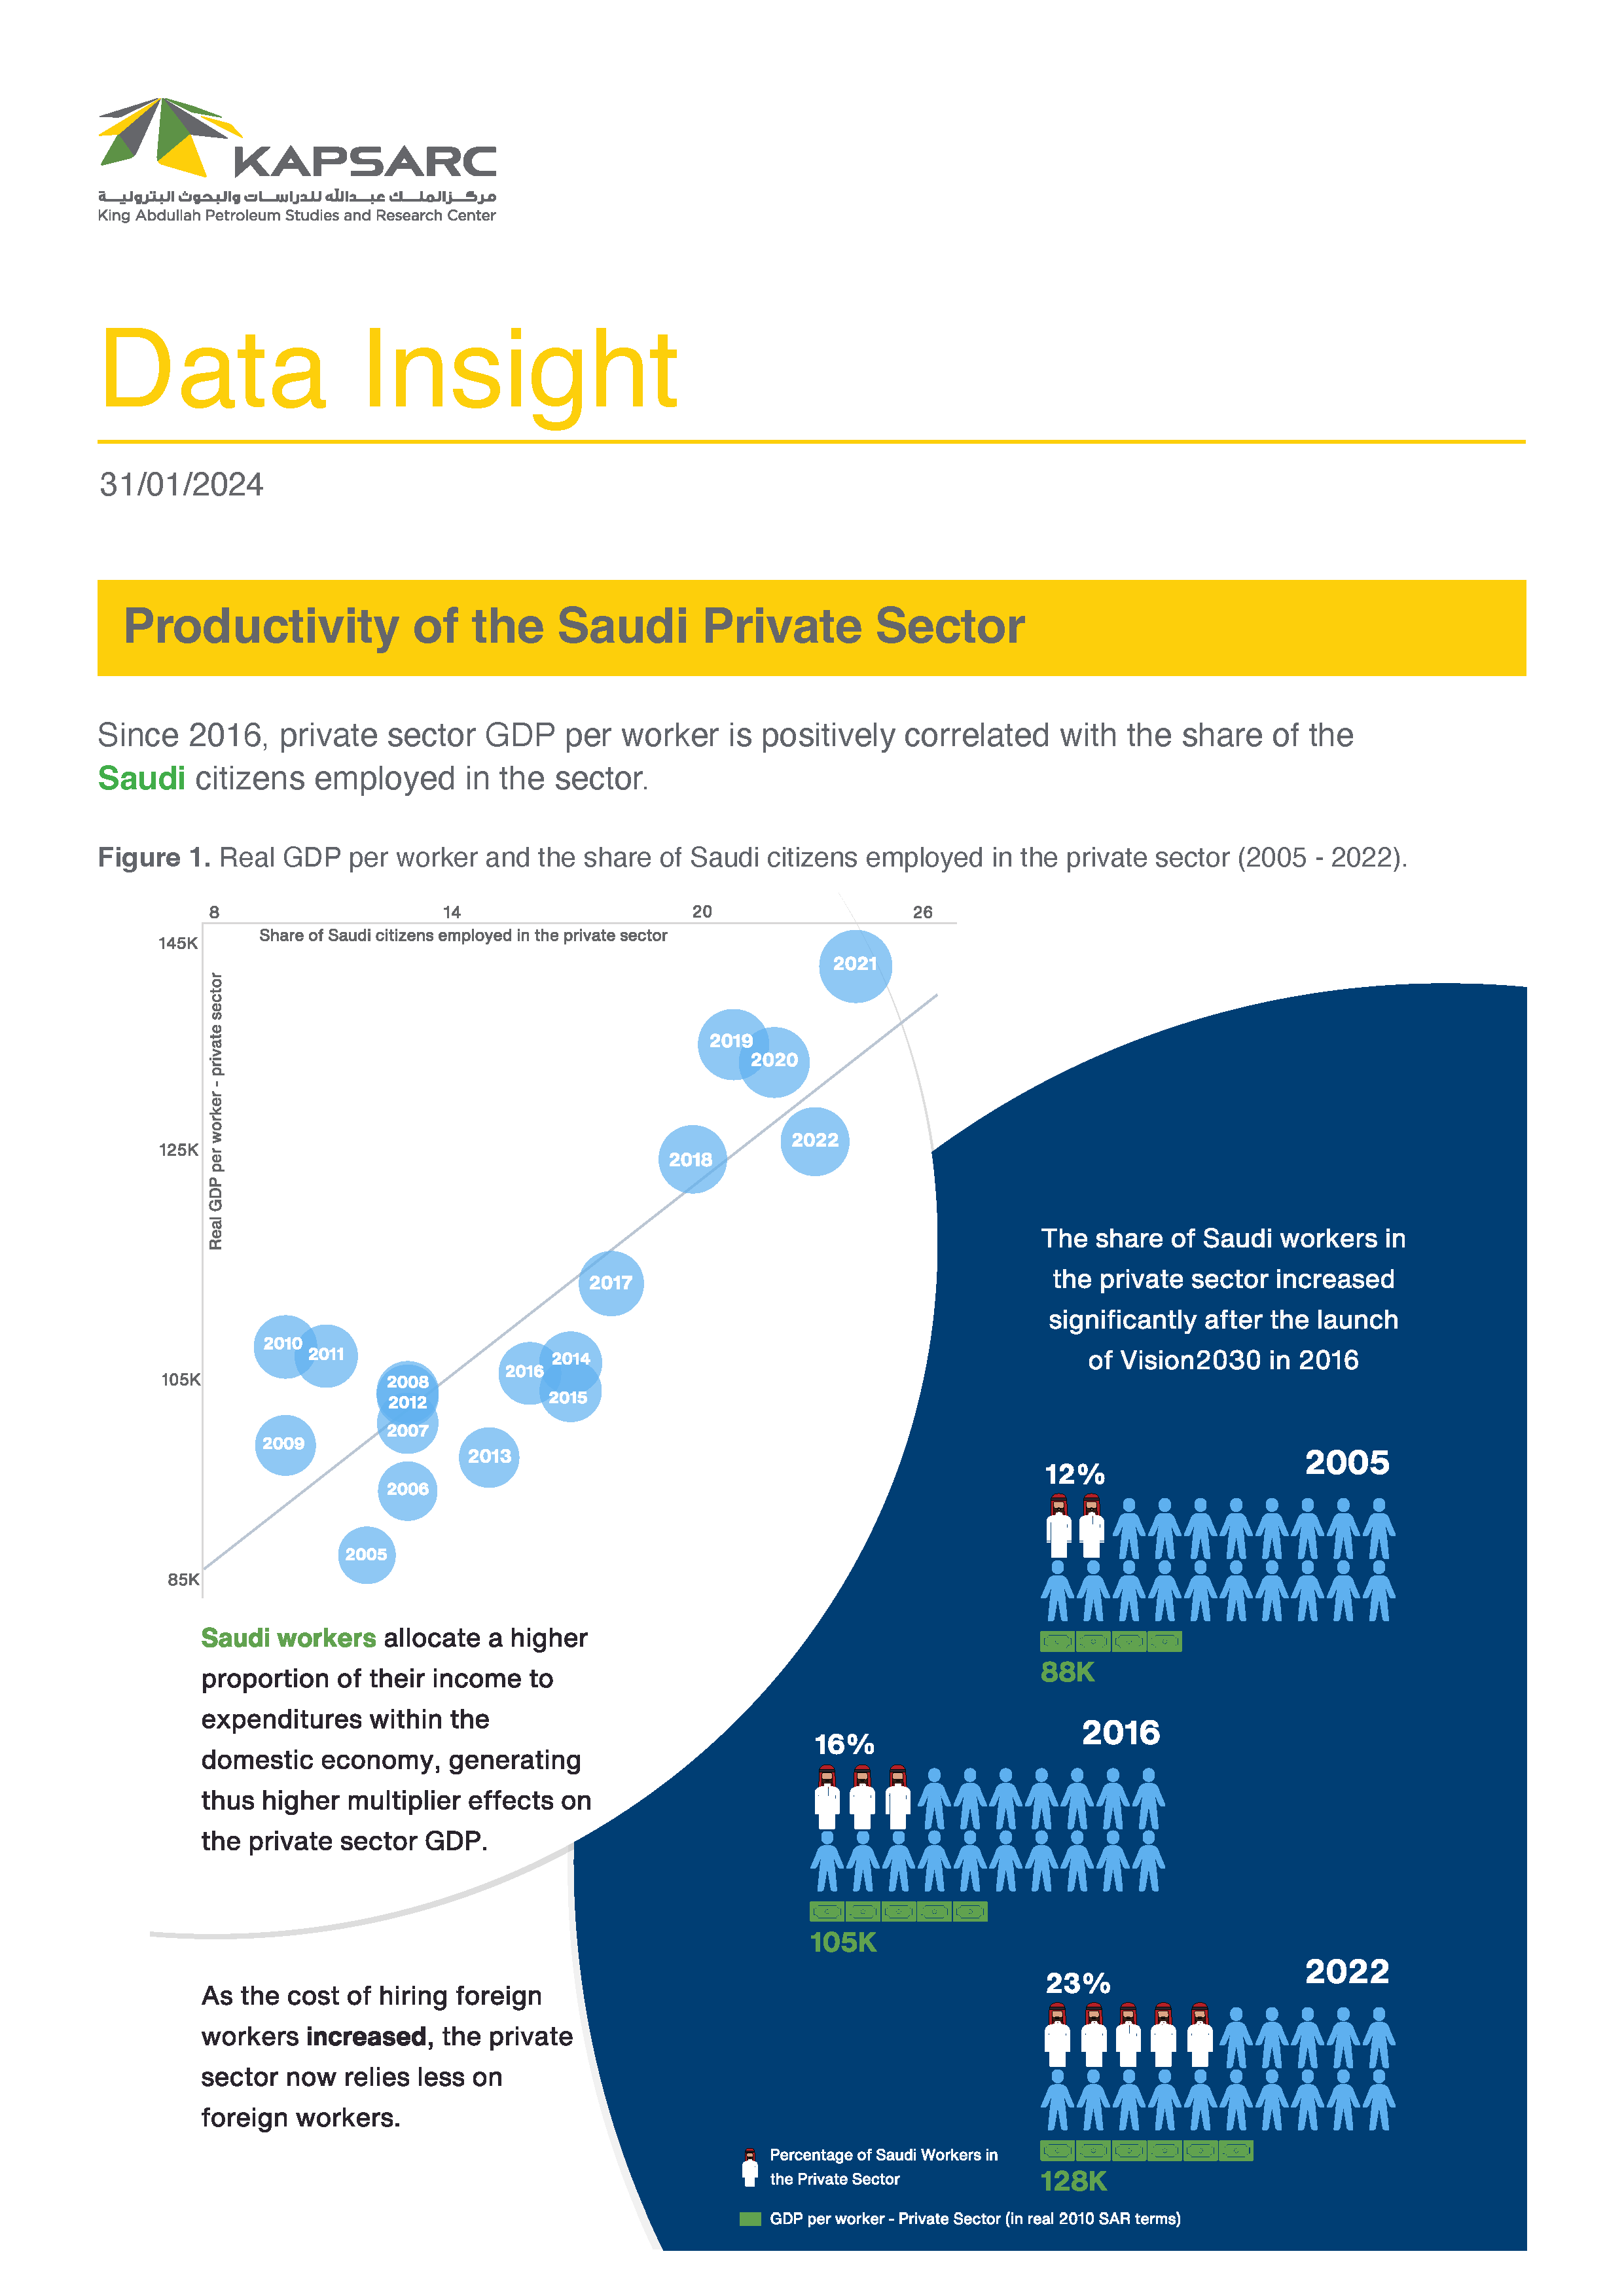 Productivity of the Saudi Private Sector